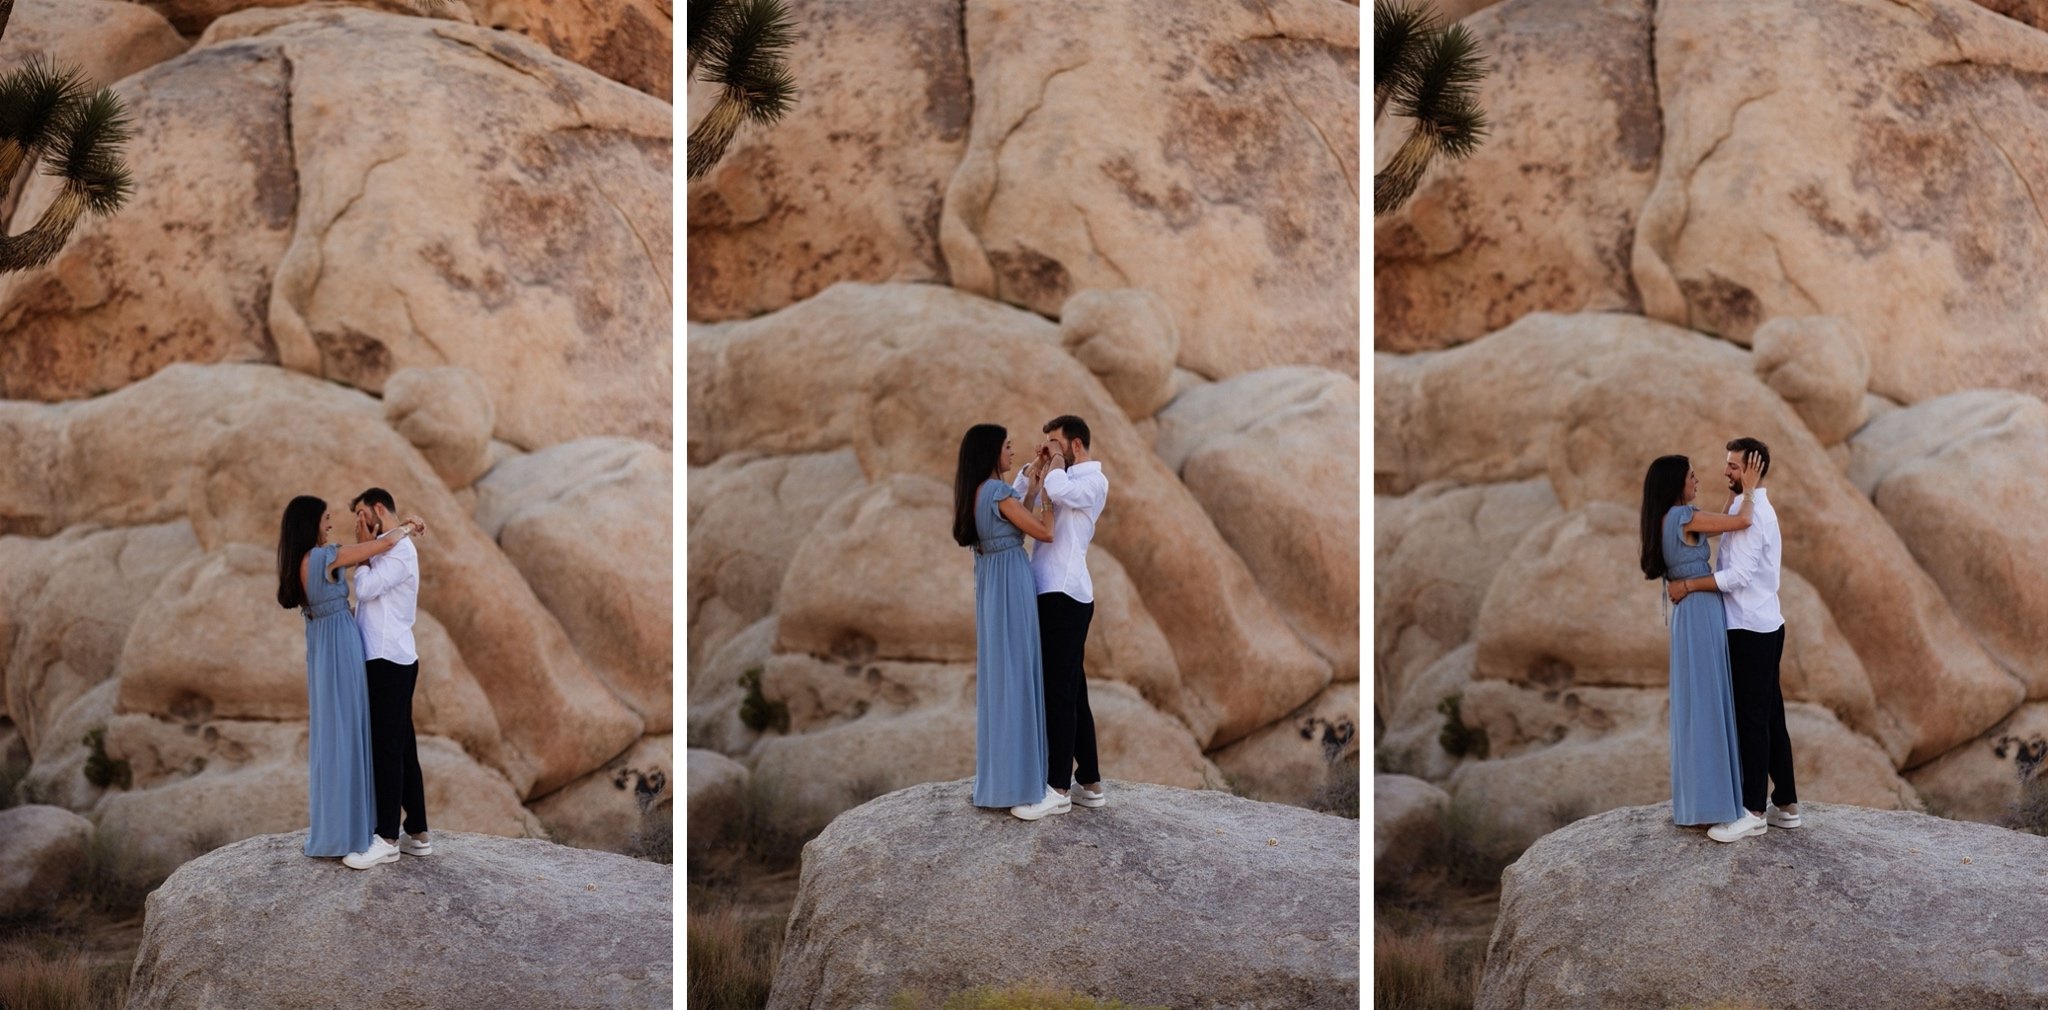 Joshua Tree Couples Session Surprise Proposal - Will Khoury Photography_22.jpg